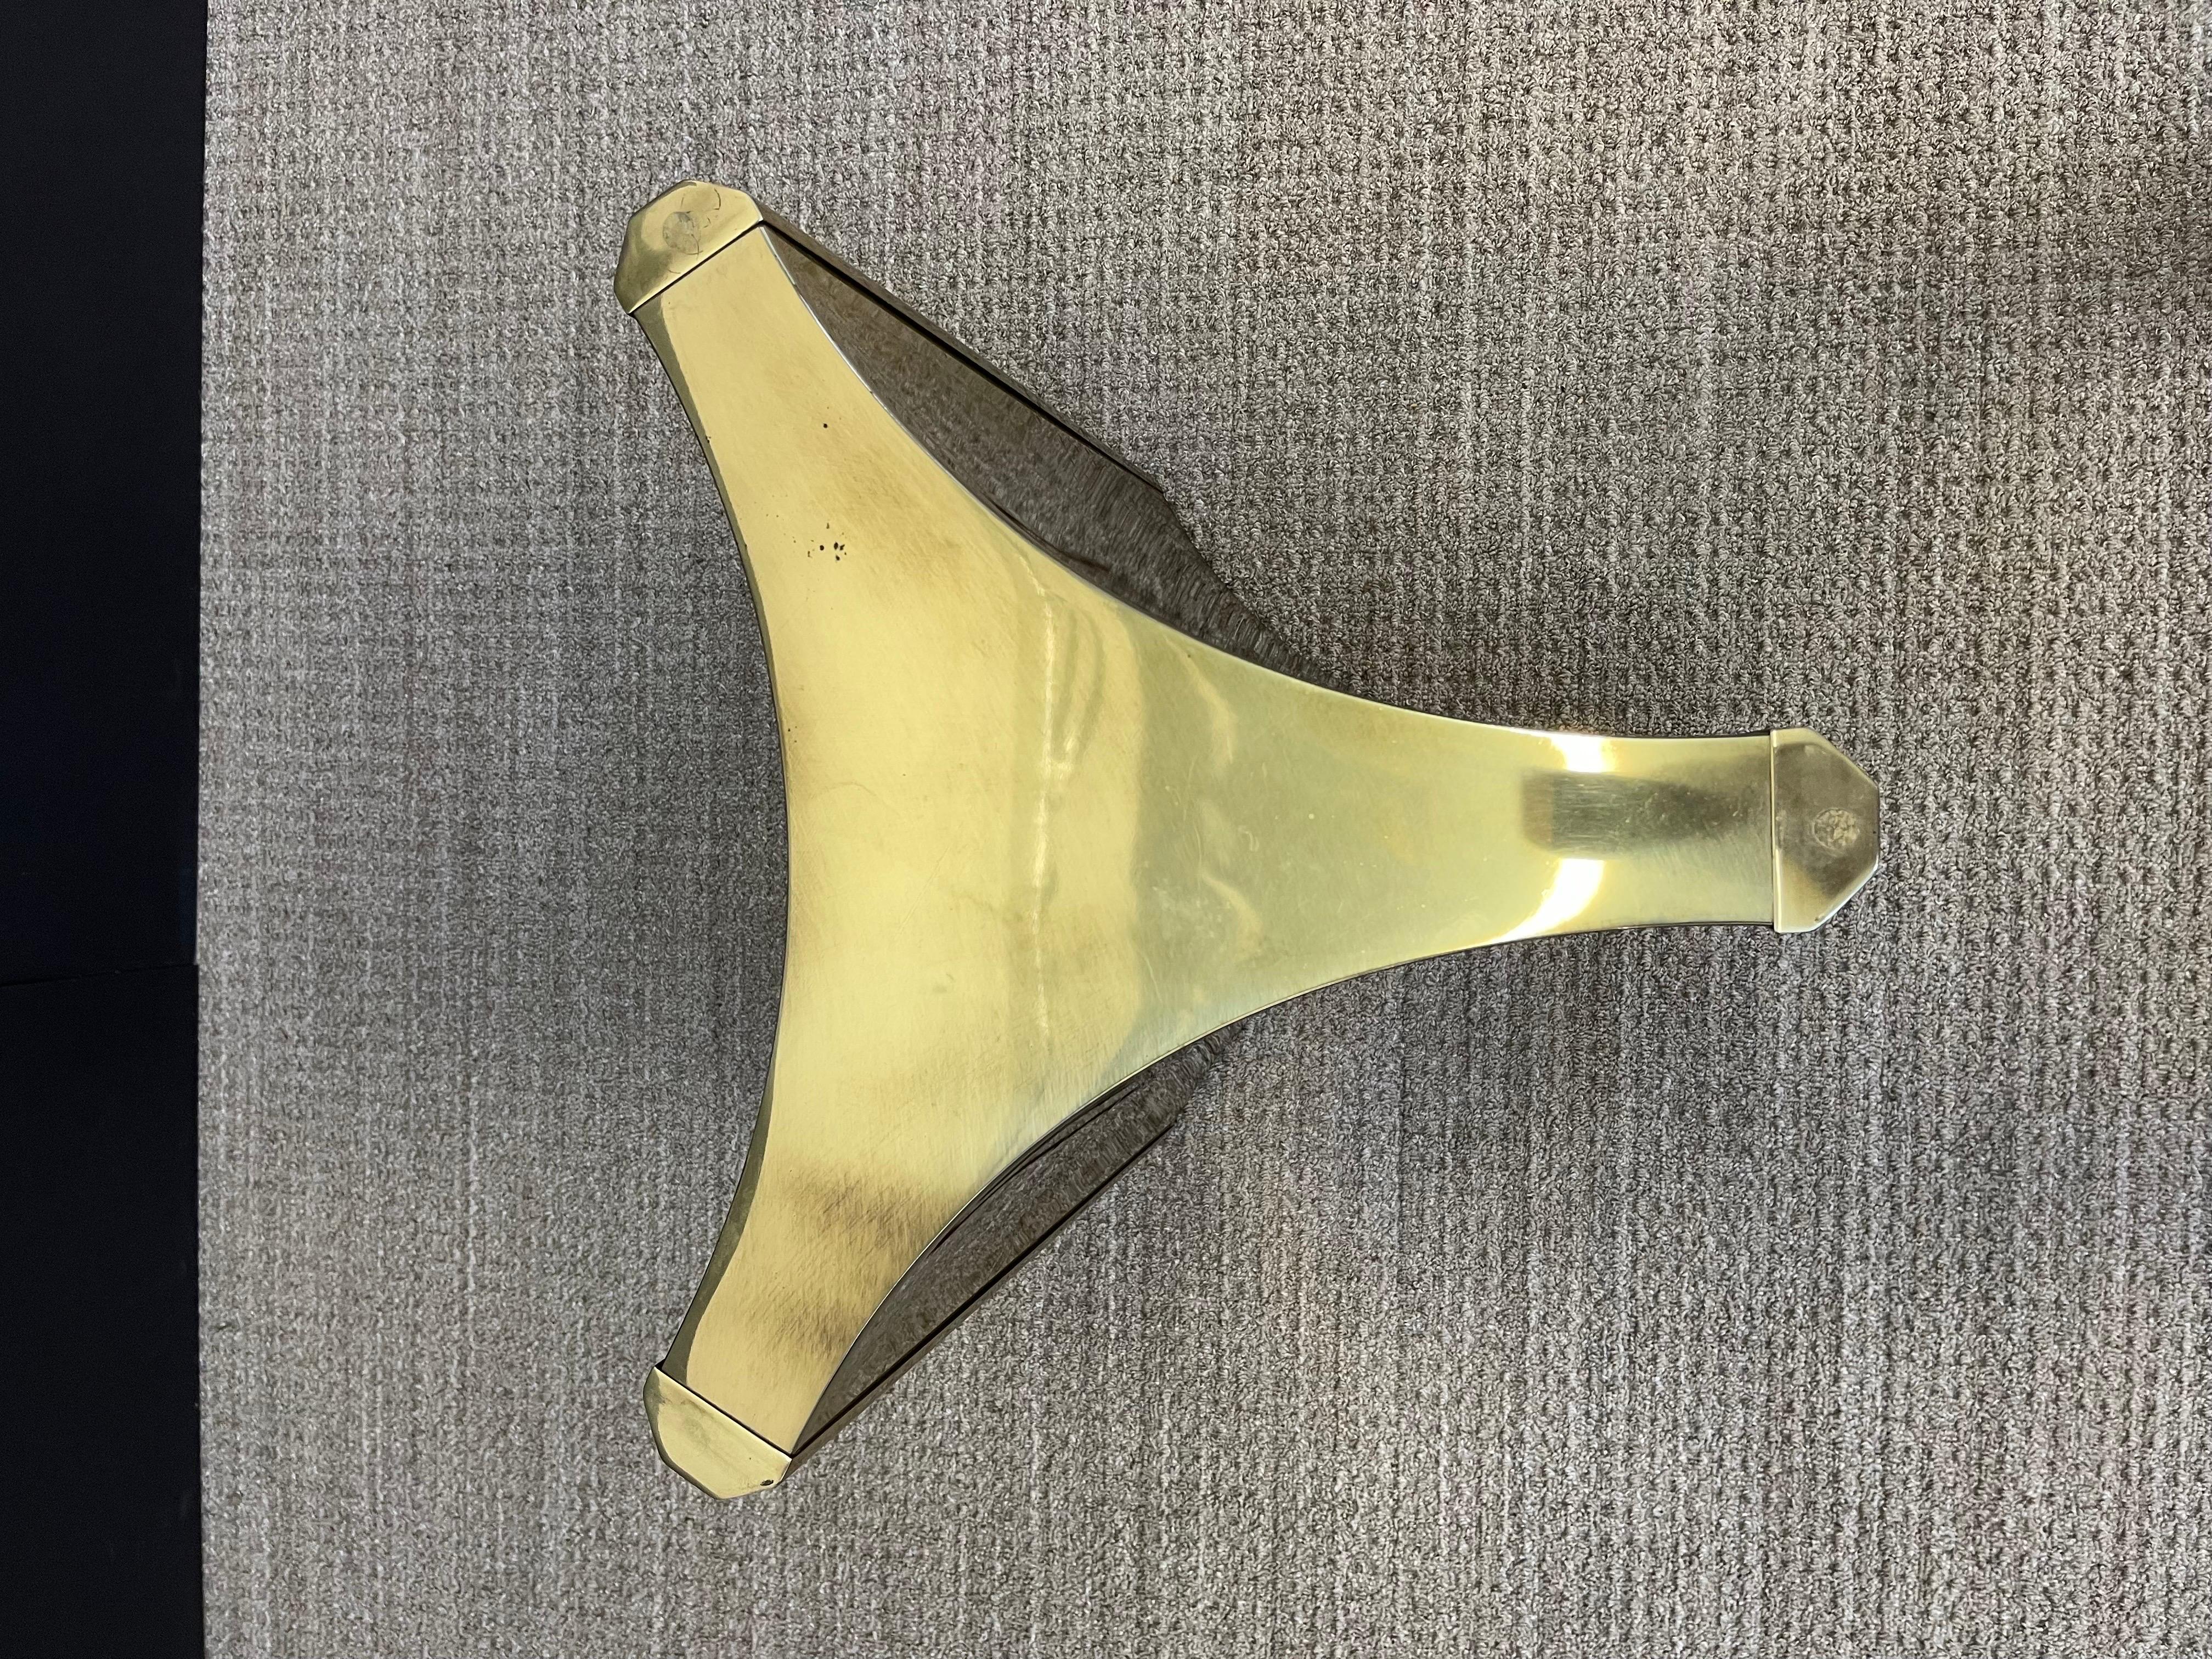 One of the hottest items currently with interior designers are these gleaming brass 'Trilobi' Mastercraft dining table bases, which also work excellent for a desk, feature a hefty triangular design with sculpted ends. The gorgeous brass displays